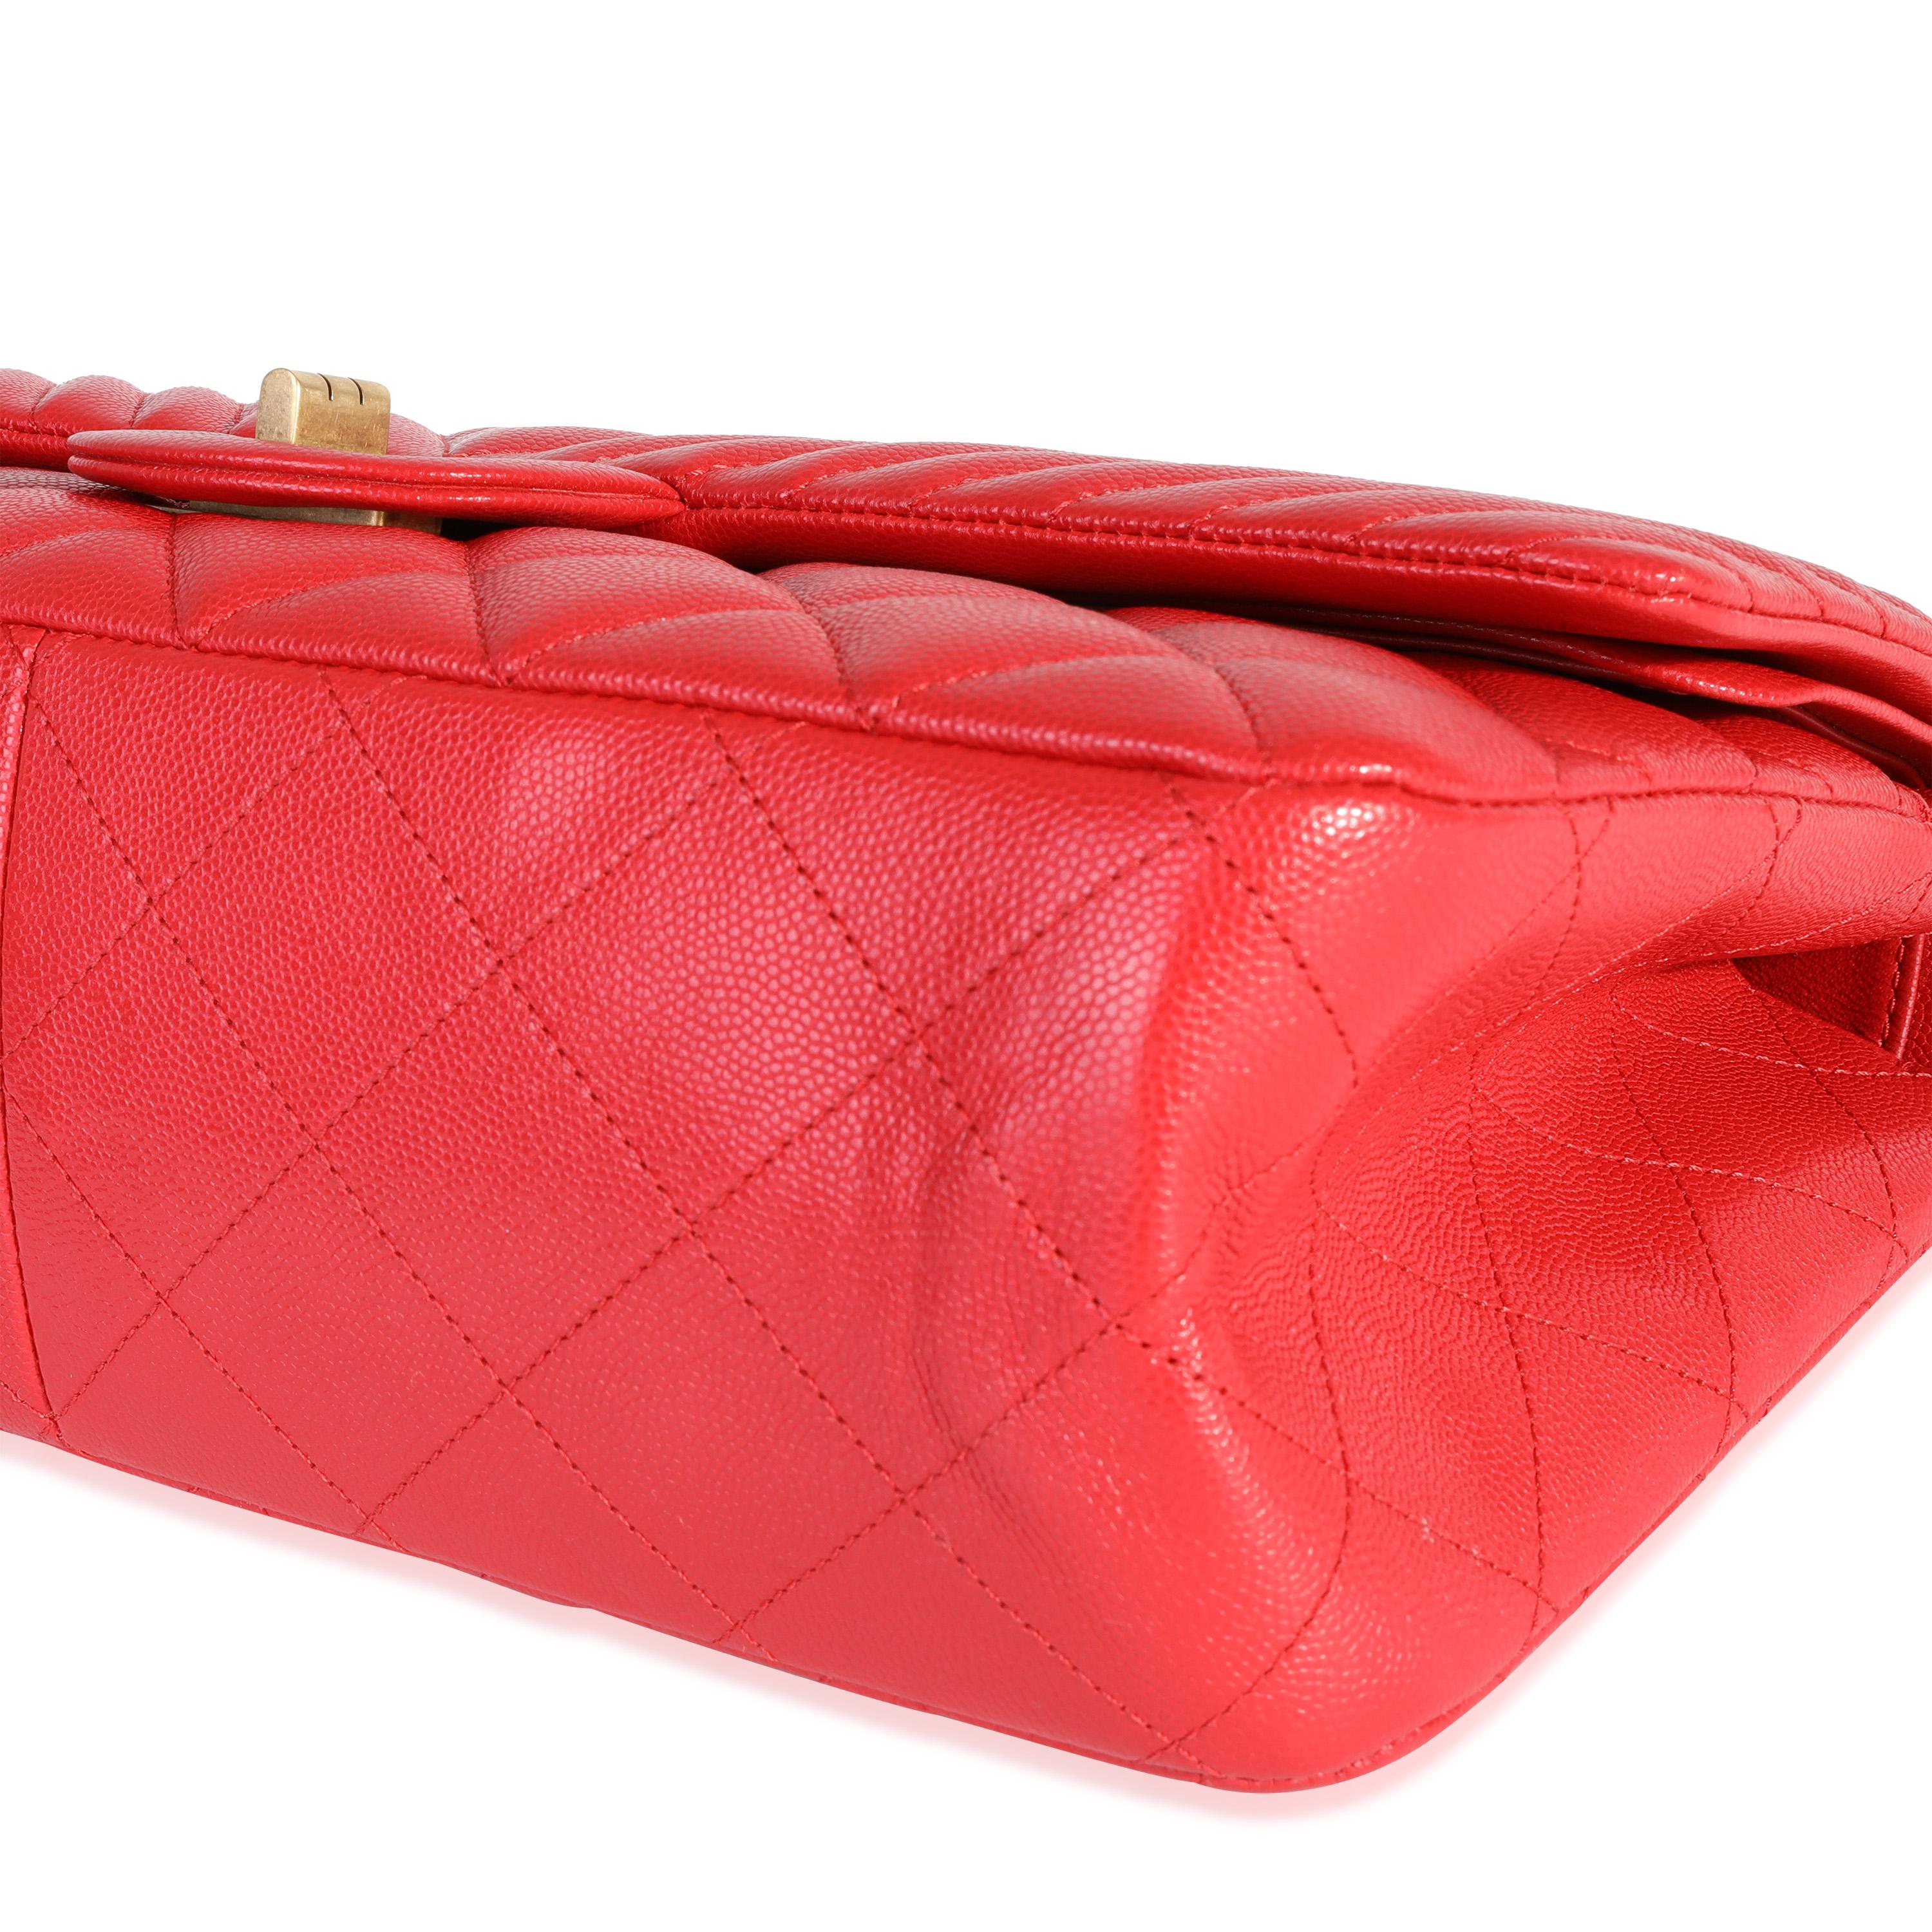 Chanel Red Quilted Caviar Reissue 2.55 227 Double Flap Bag For Sale 1